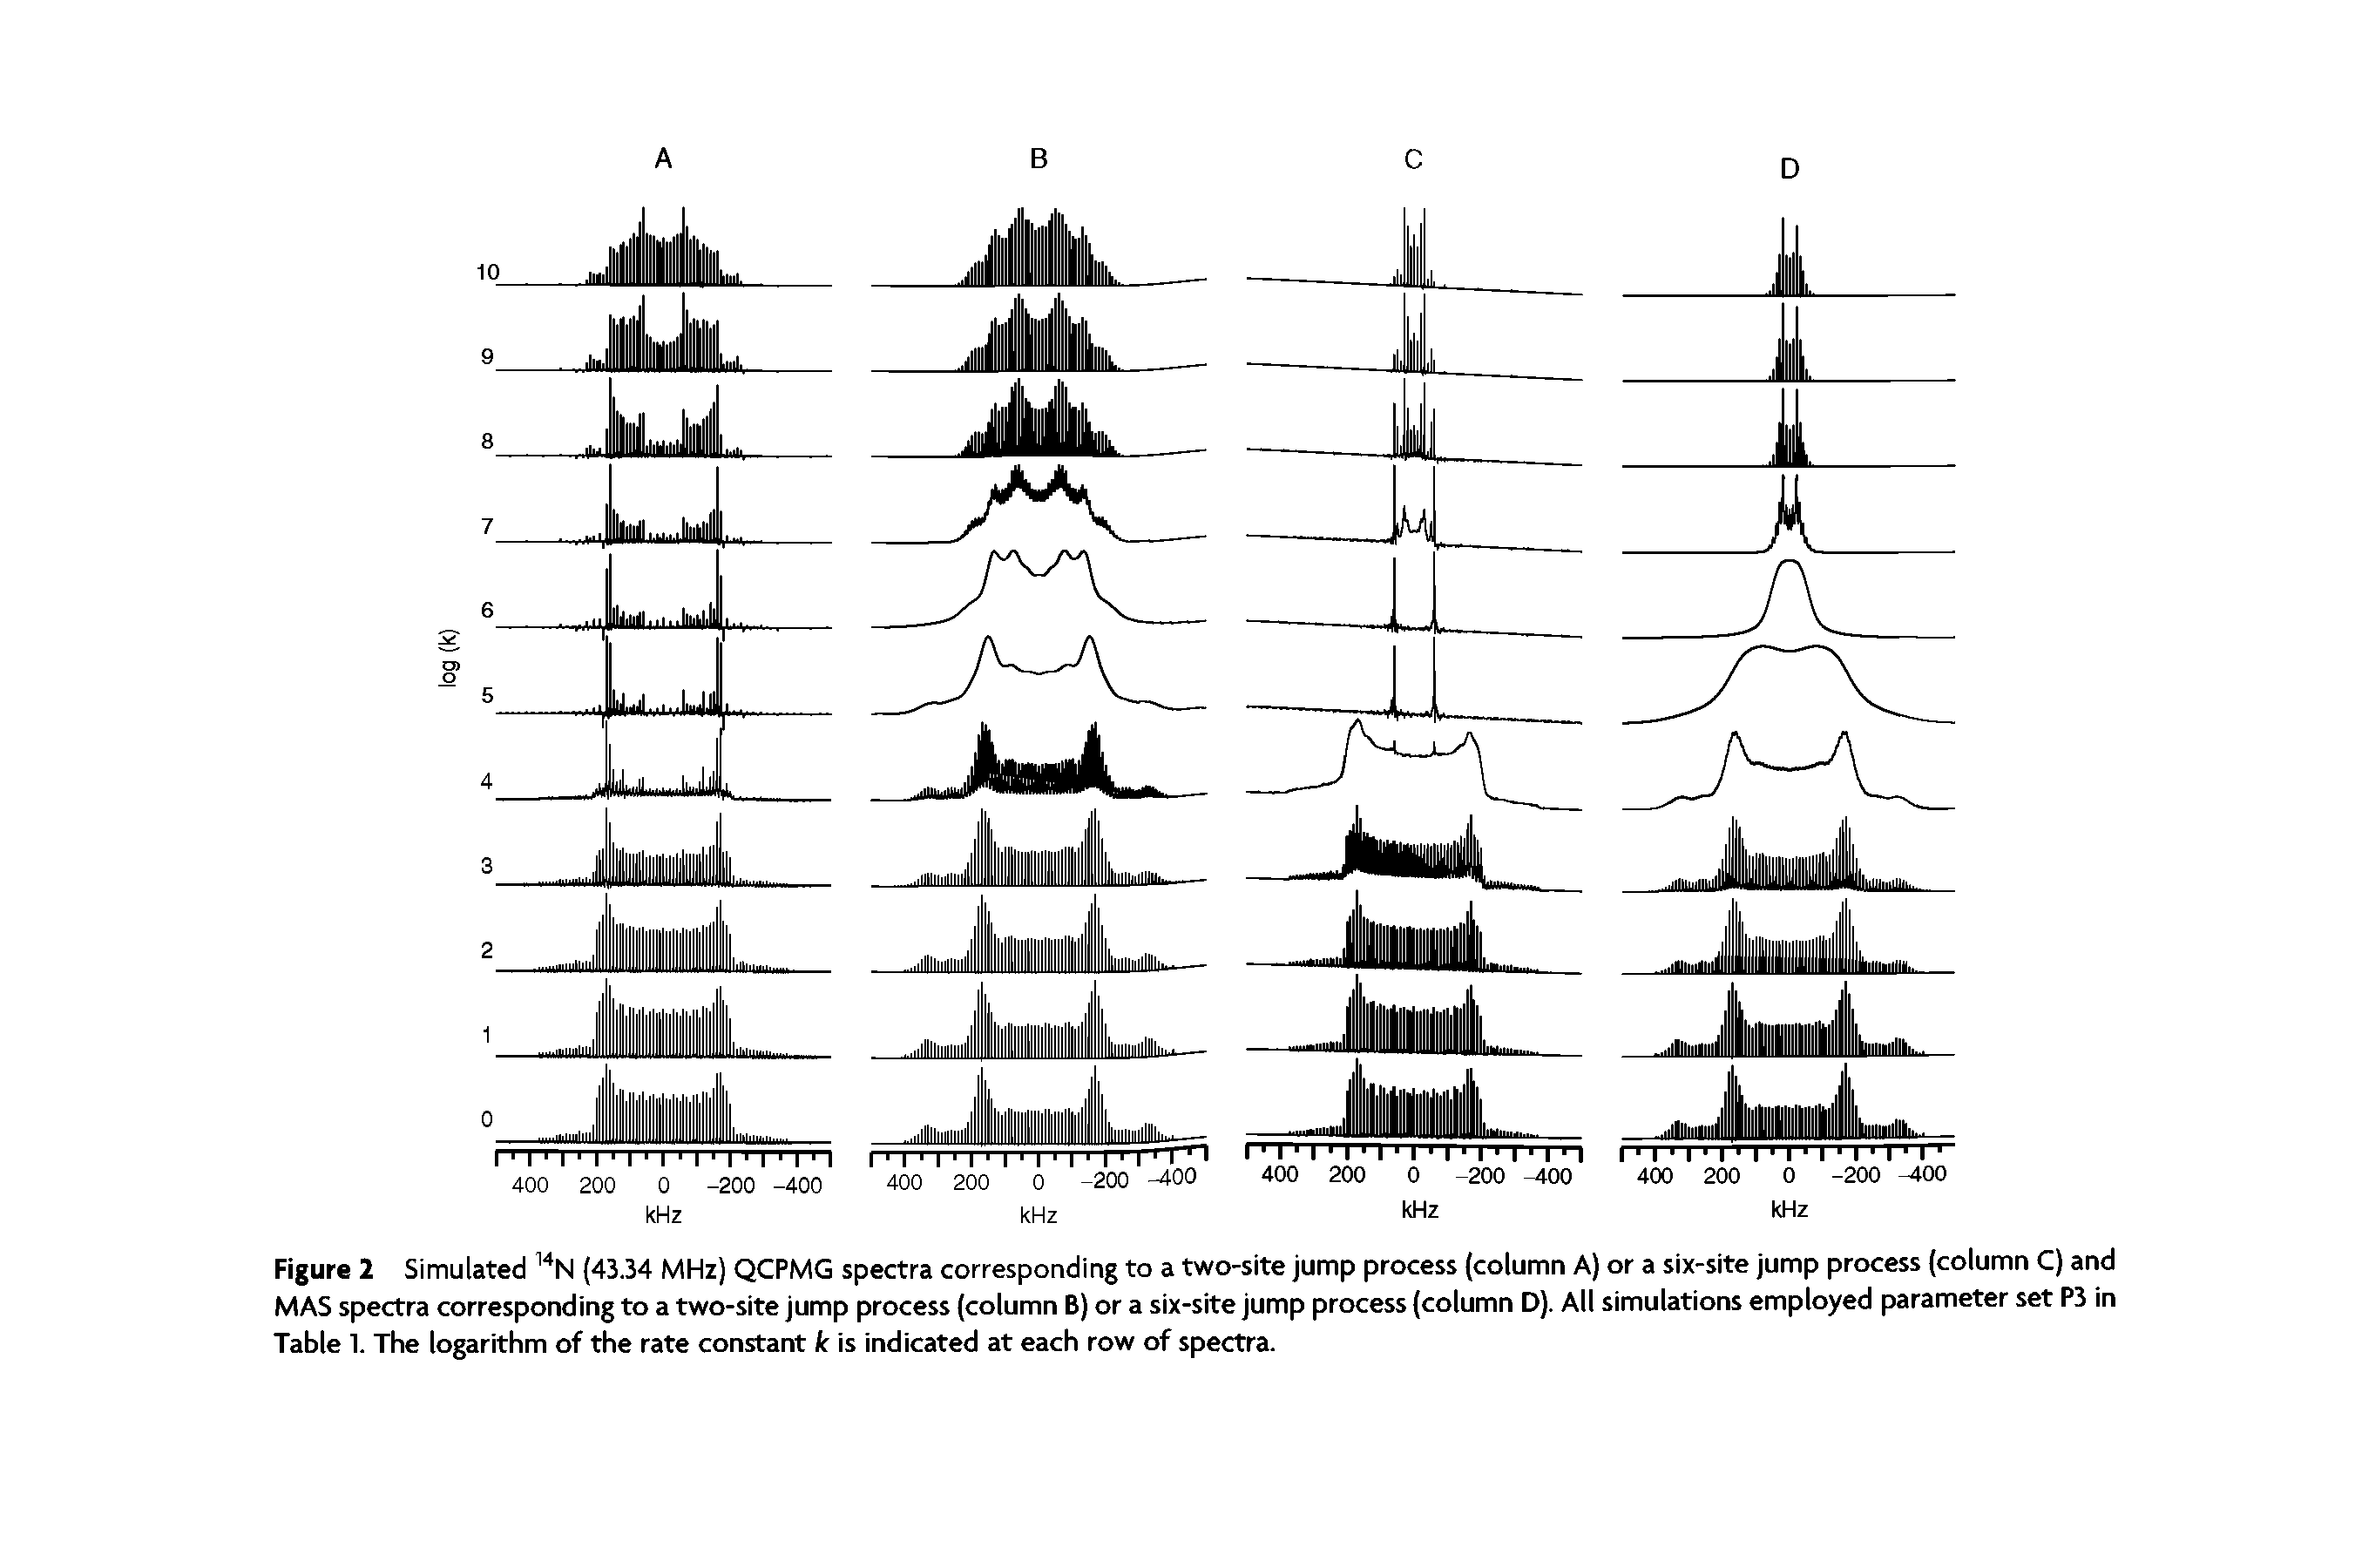 Figure 2 Simulated 14N (43.34 MHz) QCPMG spectra corresponding to a two-site jump process (column A) or a six-site jump process (column C) and MAS spectra corresponding to a two-site jump process (column B) or a six-site jump process (column D). All simulations employed parameter set P3 in Table 1. The logarithm of the rate constant k is indicated at each row of spectra.